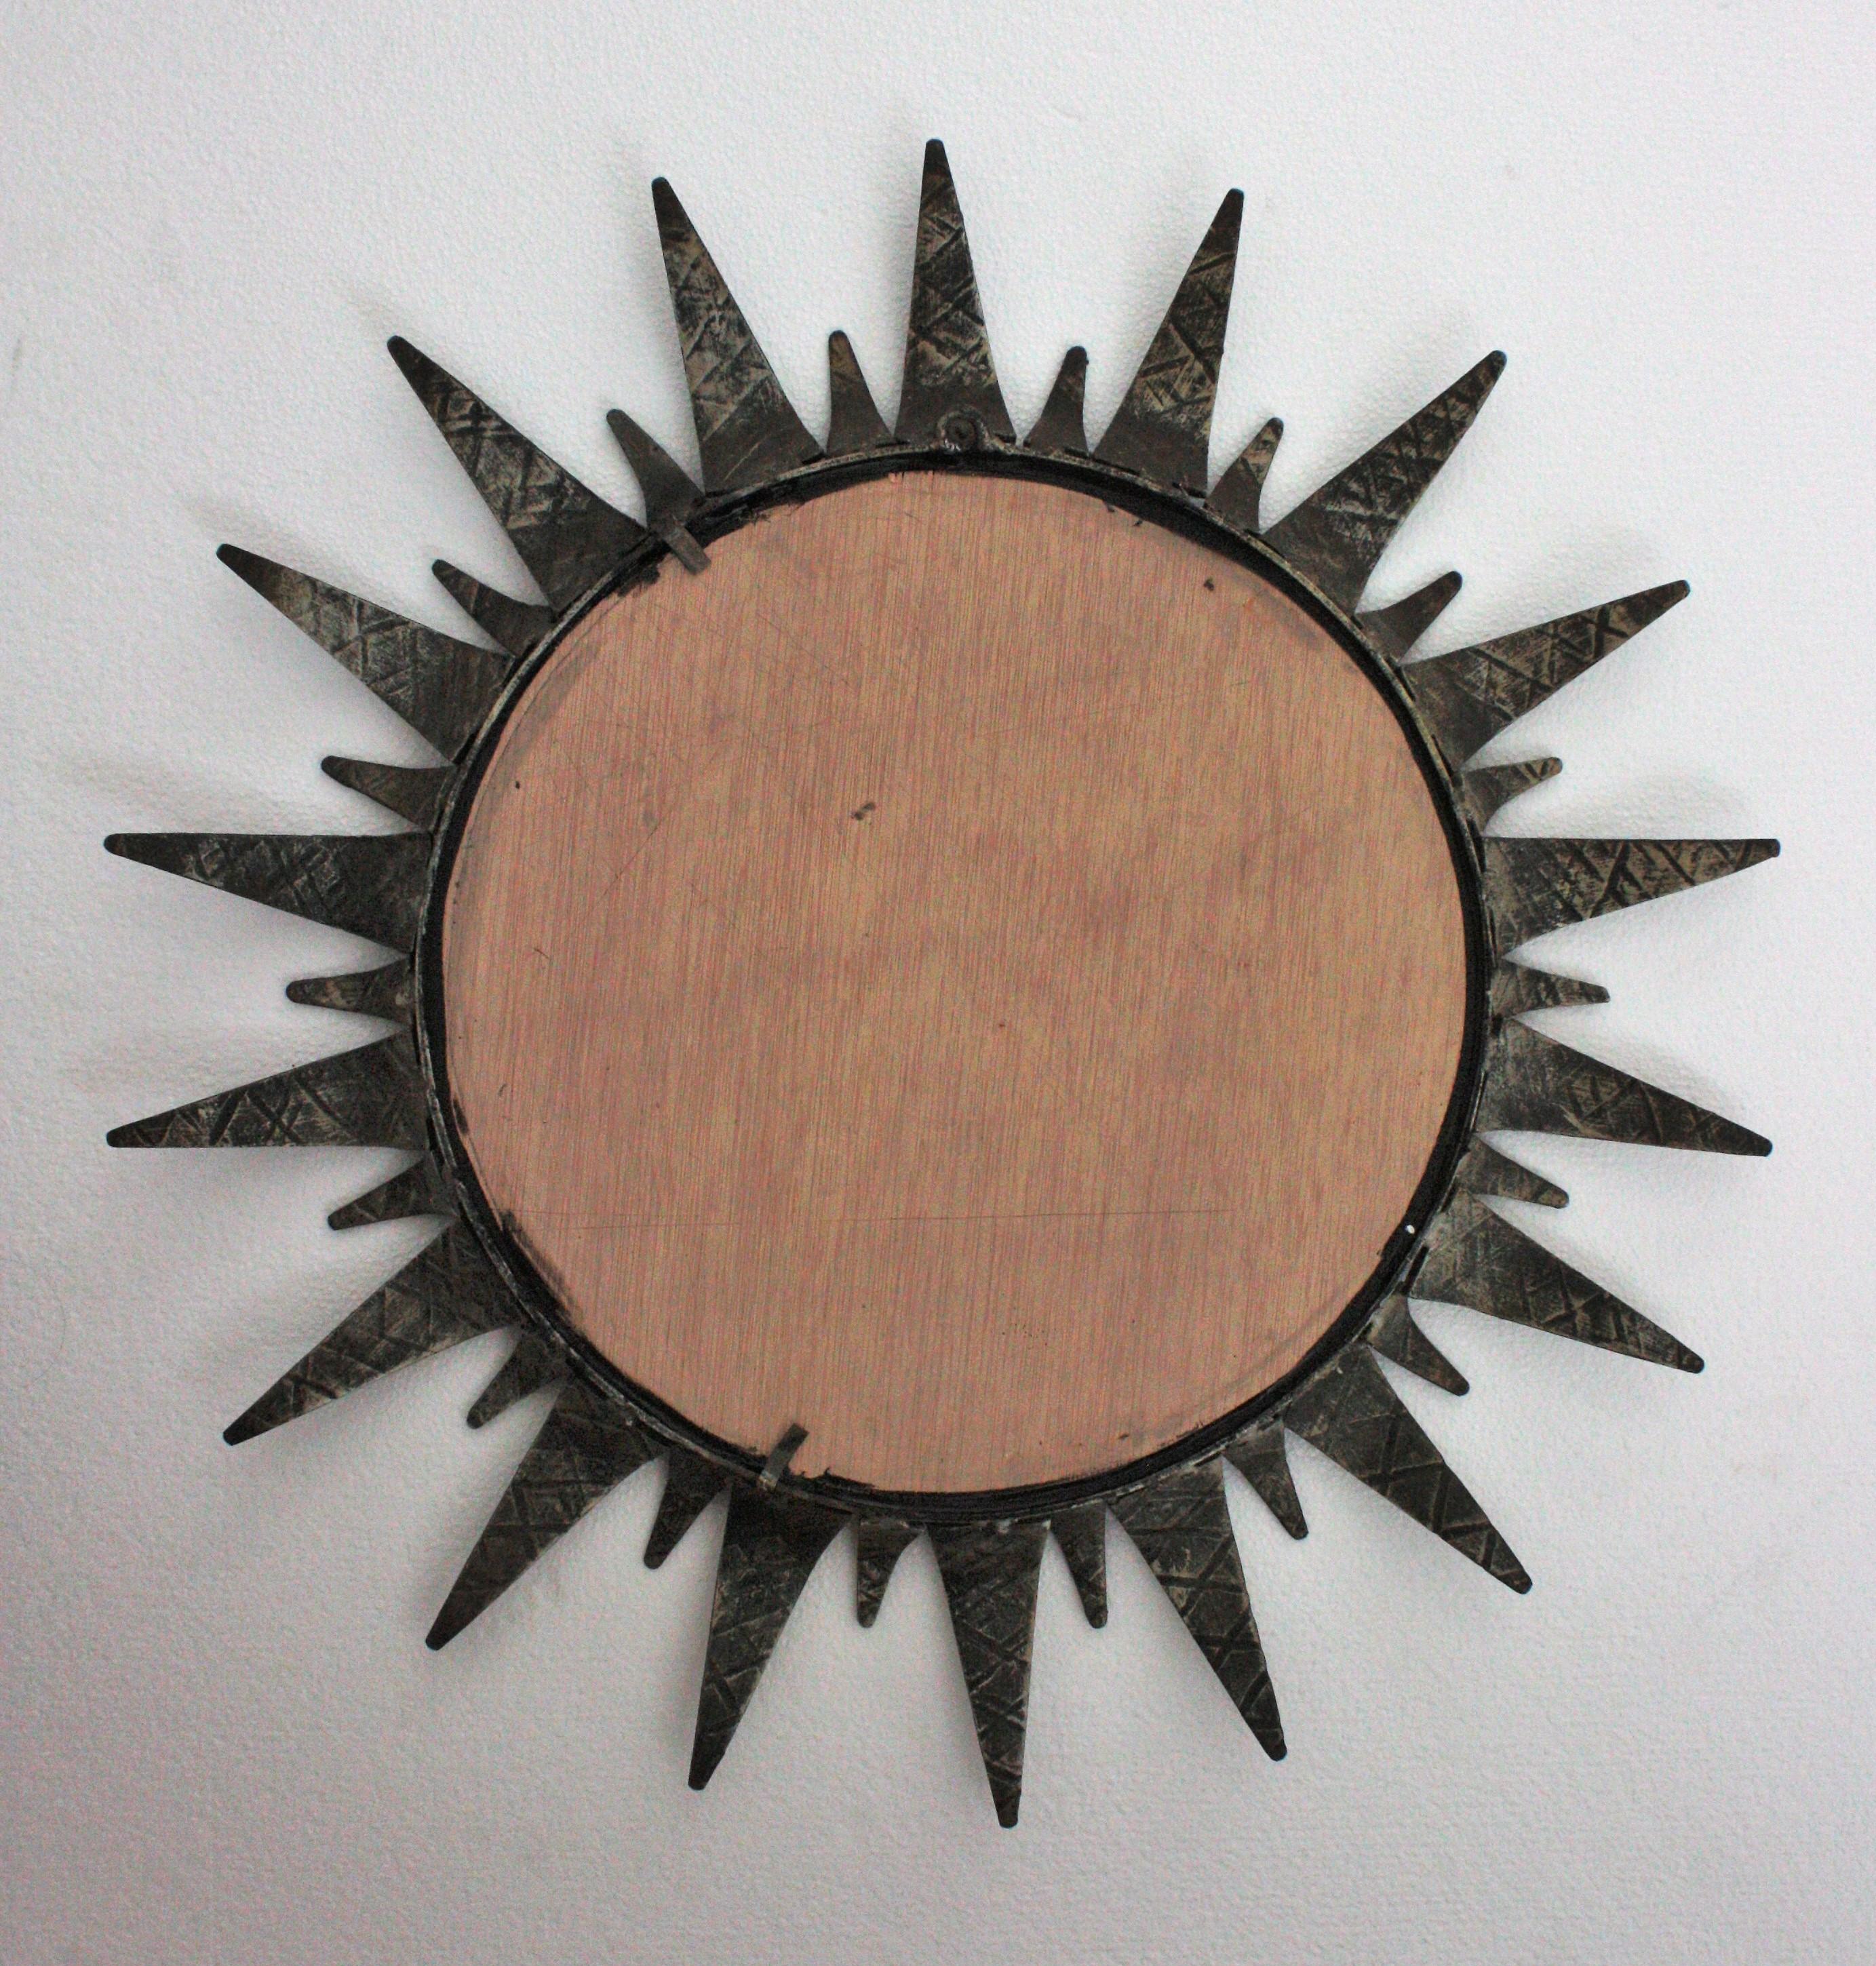 Spanish Sunburst Mirror in Silvered Wrought Iron, 1950s For Sale 4